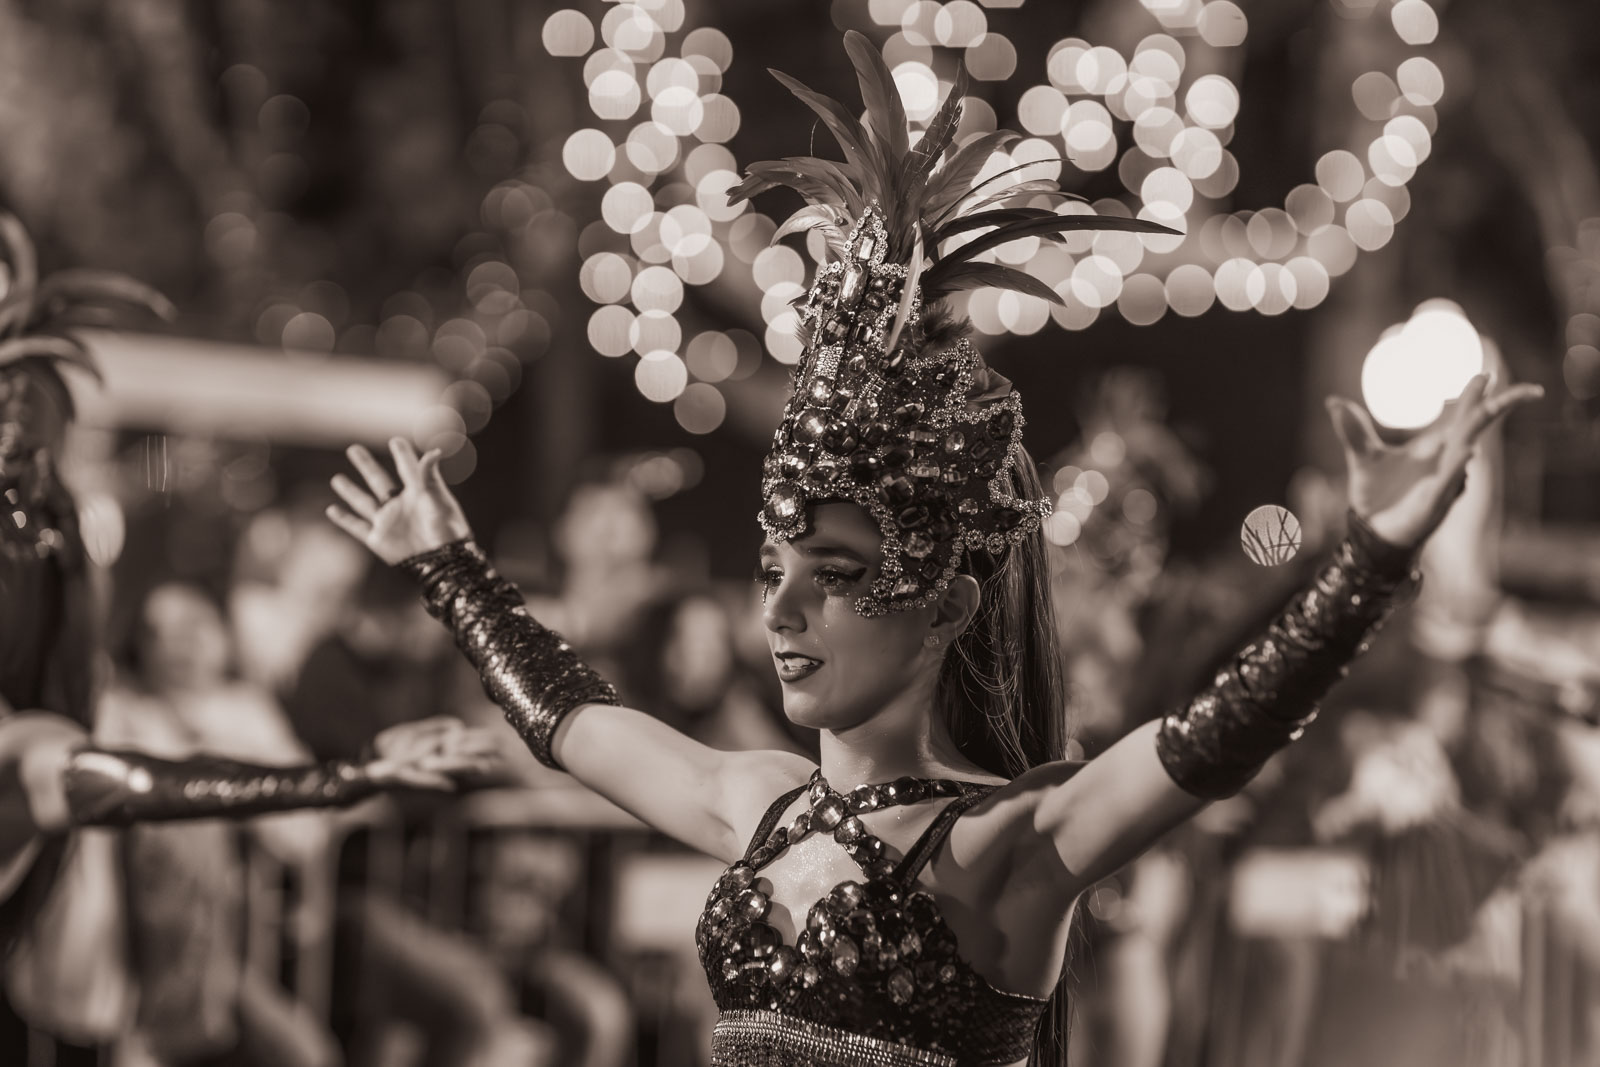 The Carnival of Life - Carnival in Madeira